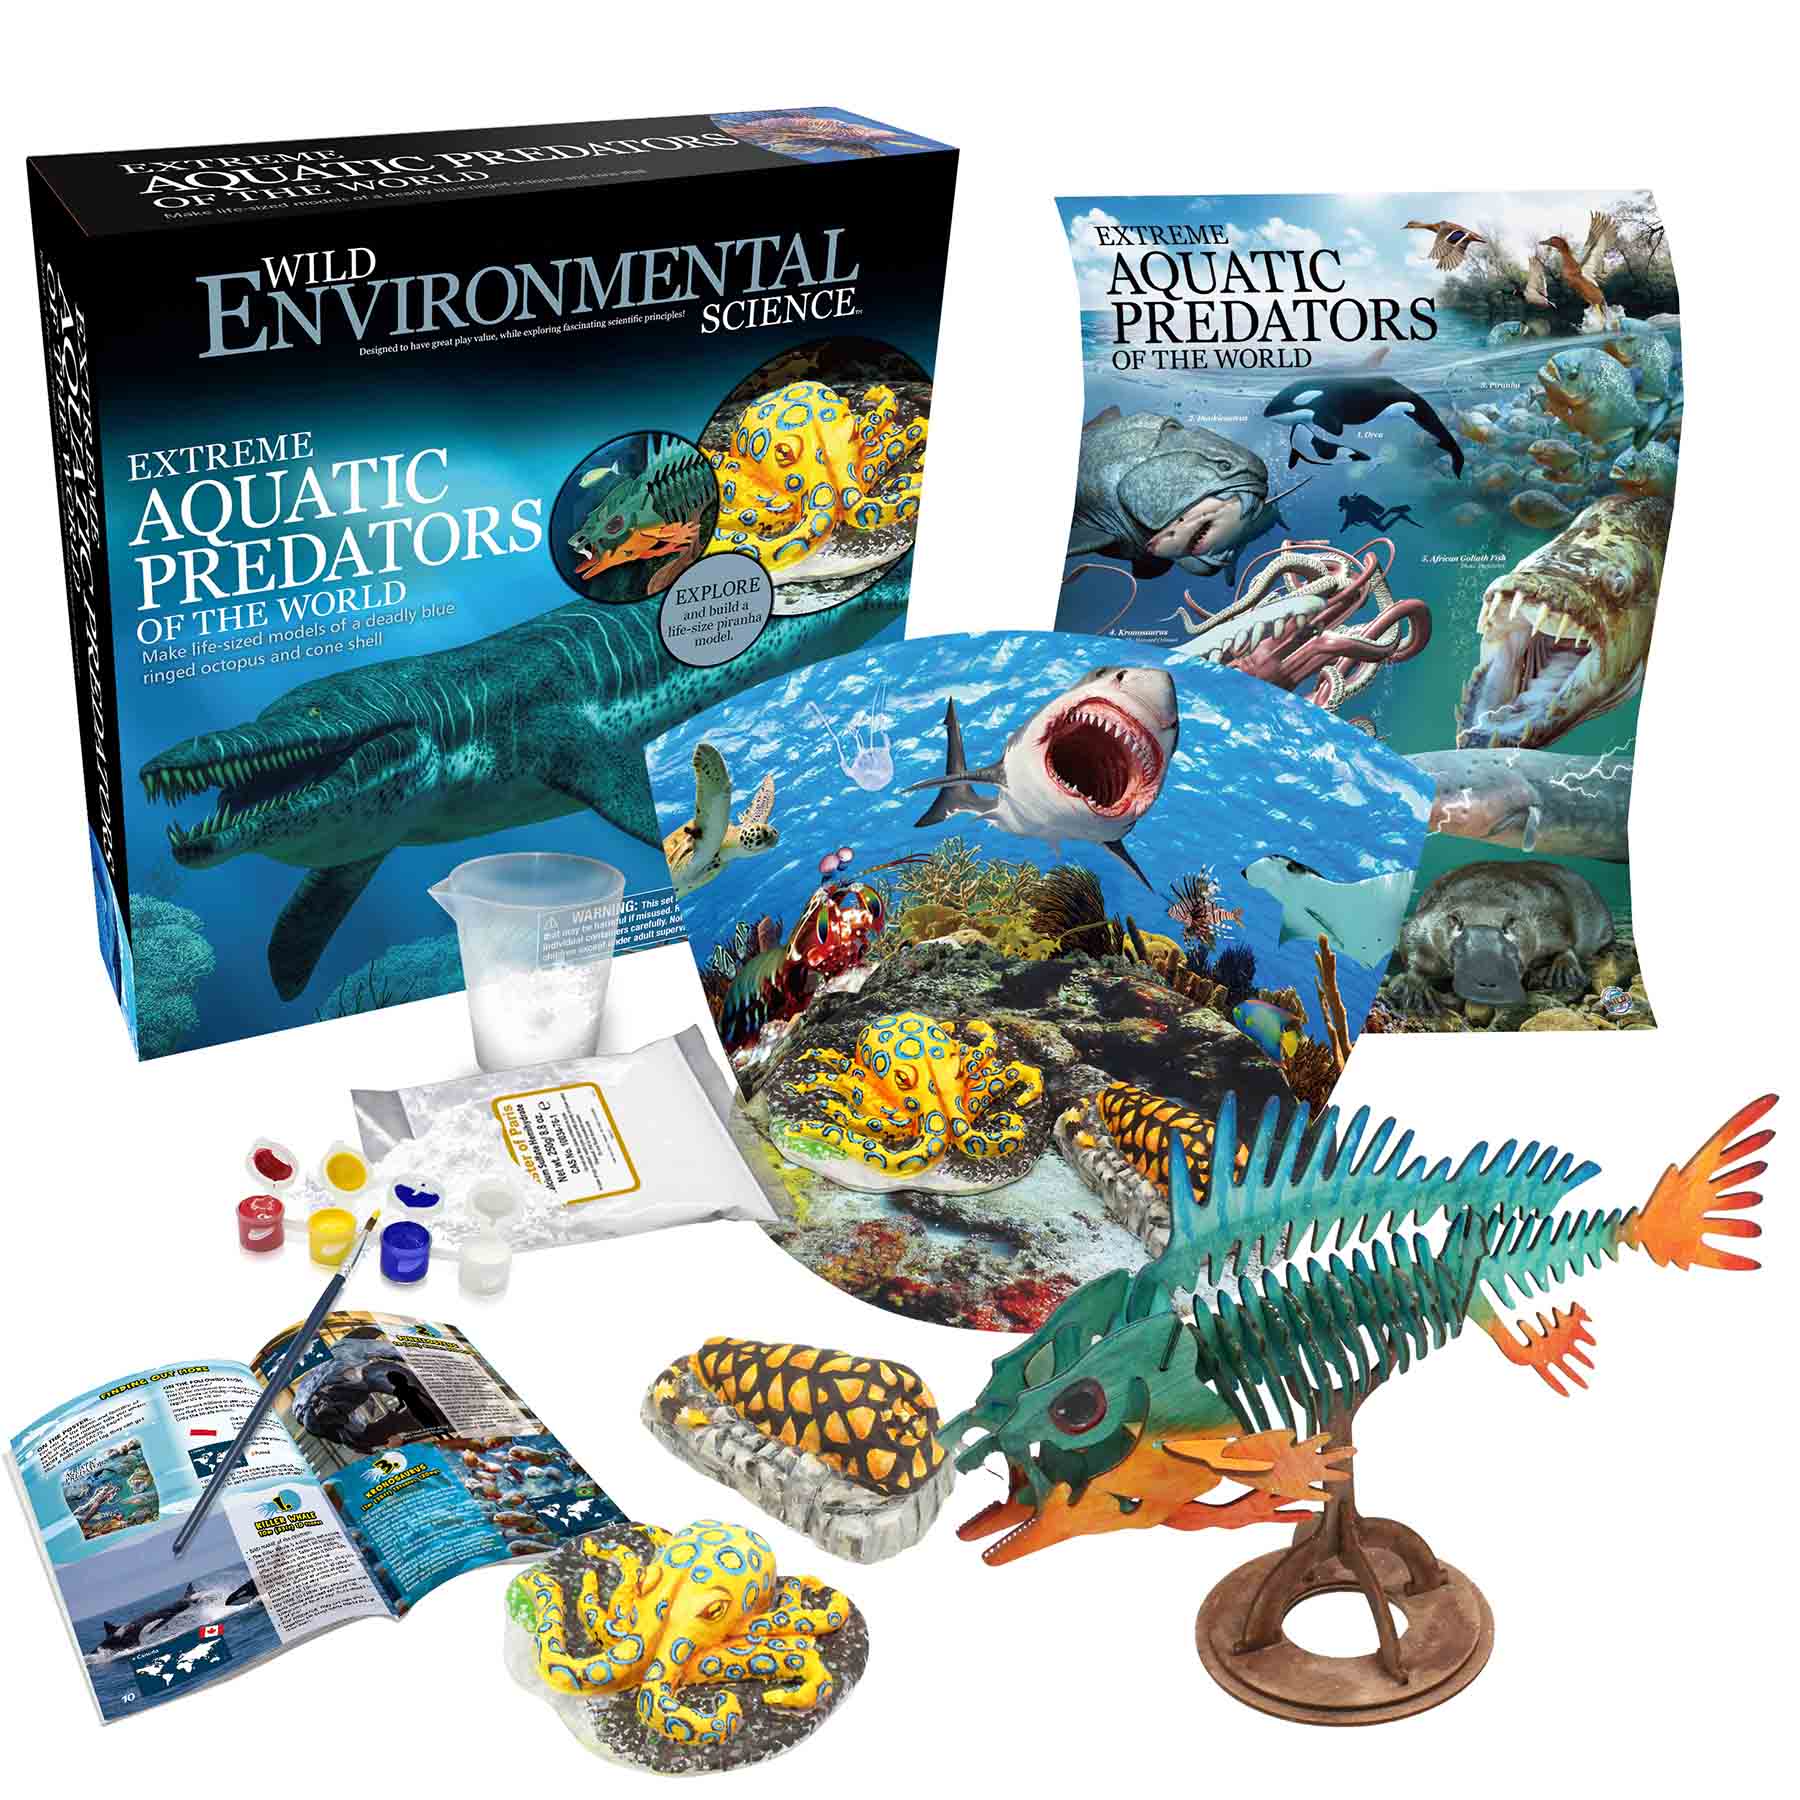 WILD ENVIRONMENTAL SCIENCE Extreme Aquatic Predators of the World - Ages 6+ - Create and Customize Models and Dioramas - Study Extreme Ocean Animals